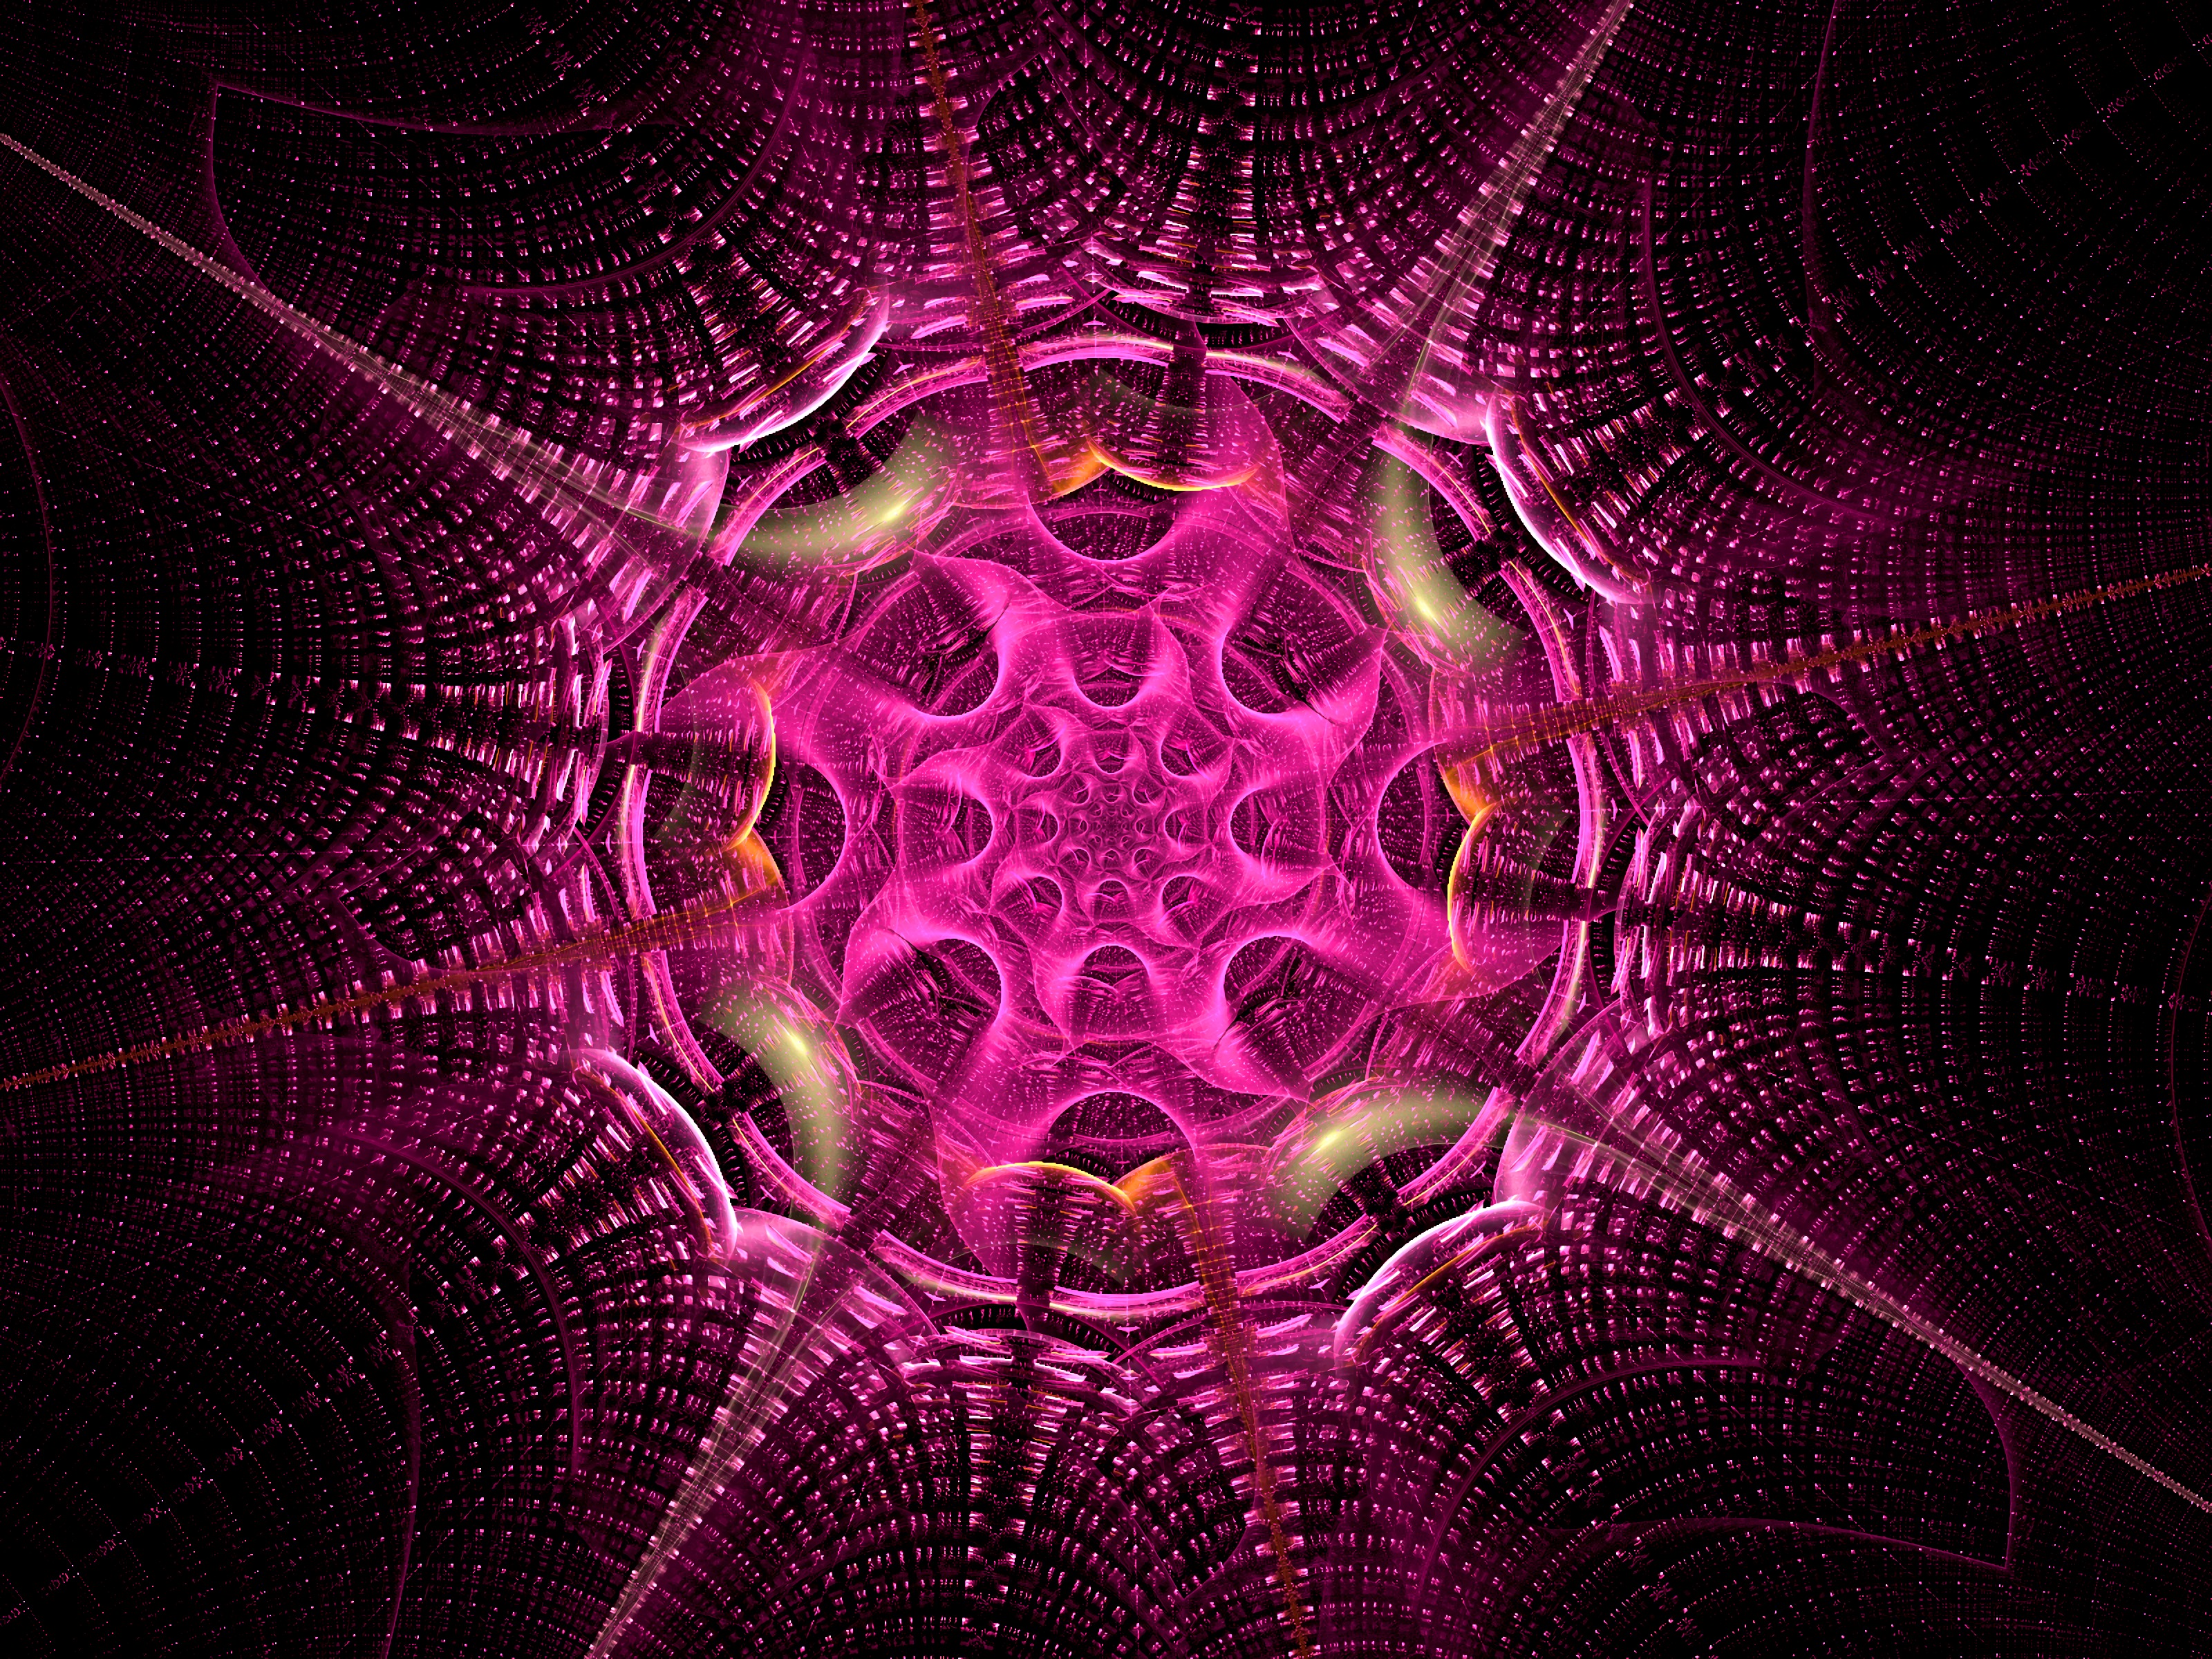 purple, abstract, violet, pattern, fractal, confused, intricate, swirling, involute Image for desktop